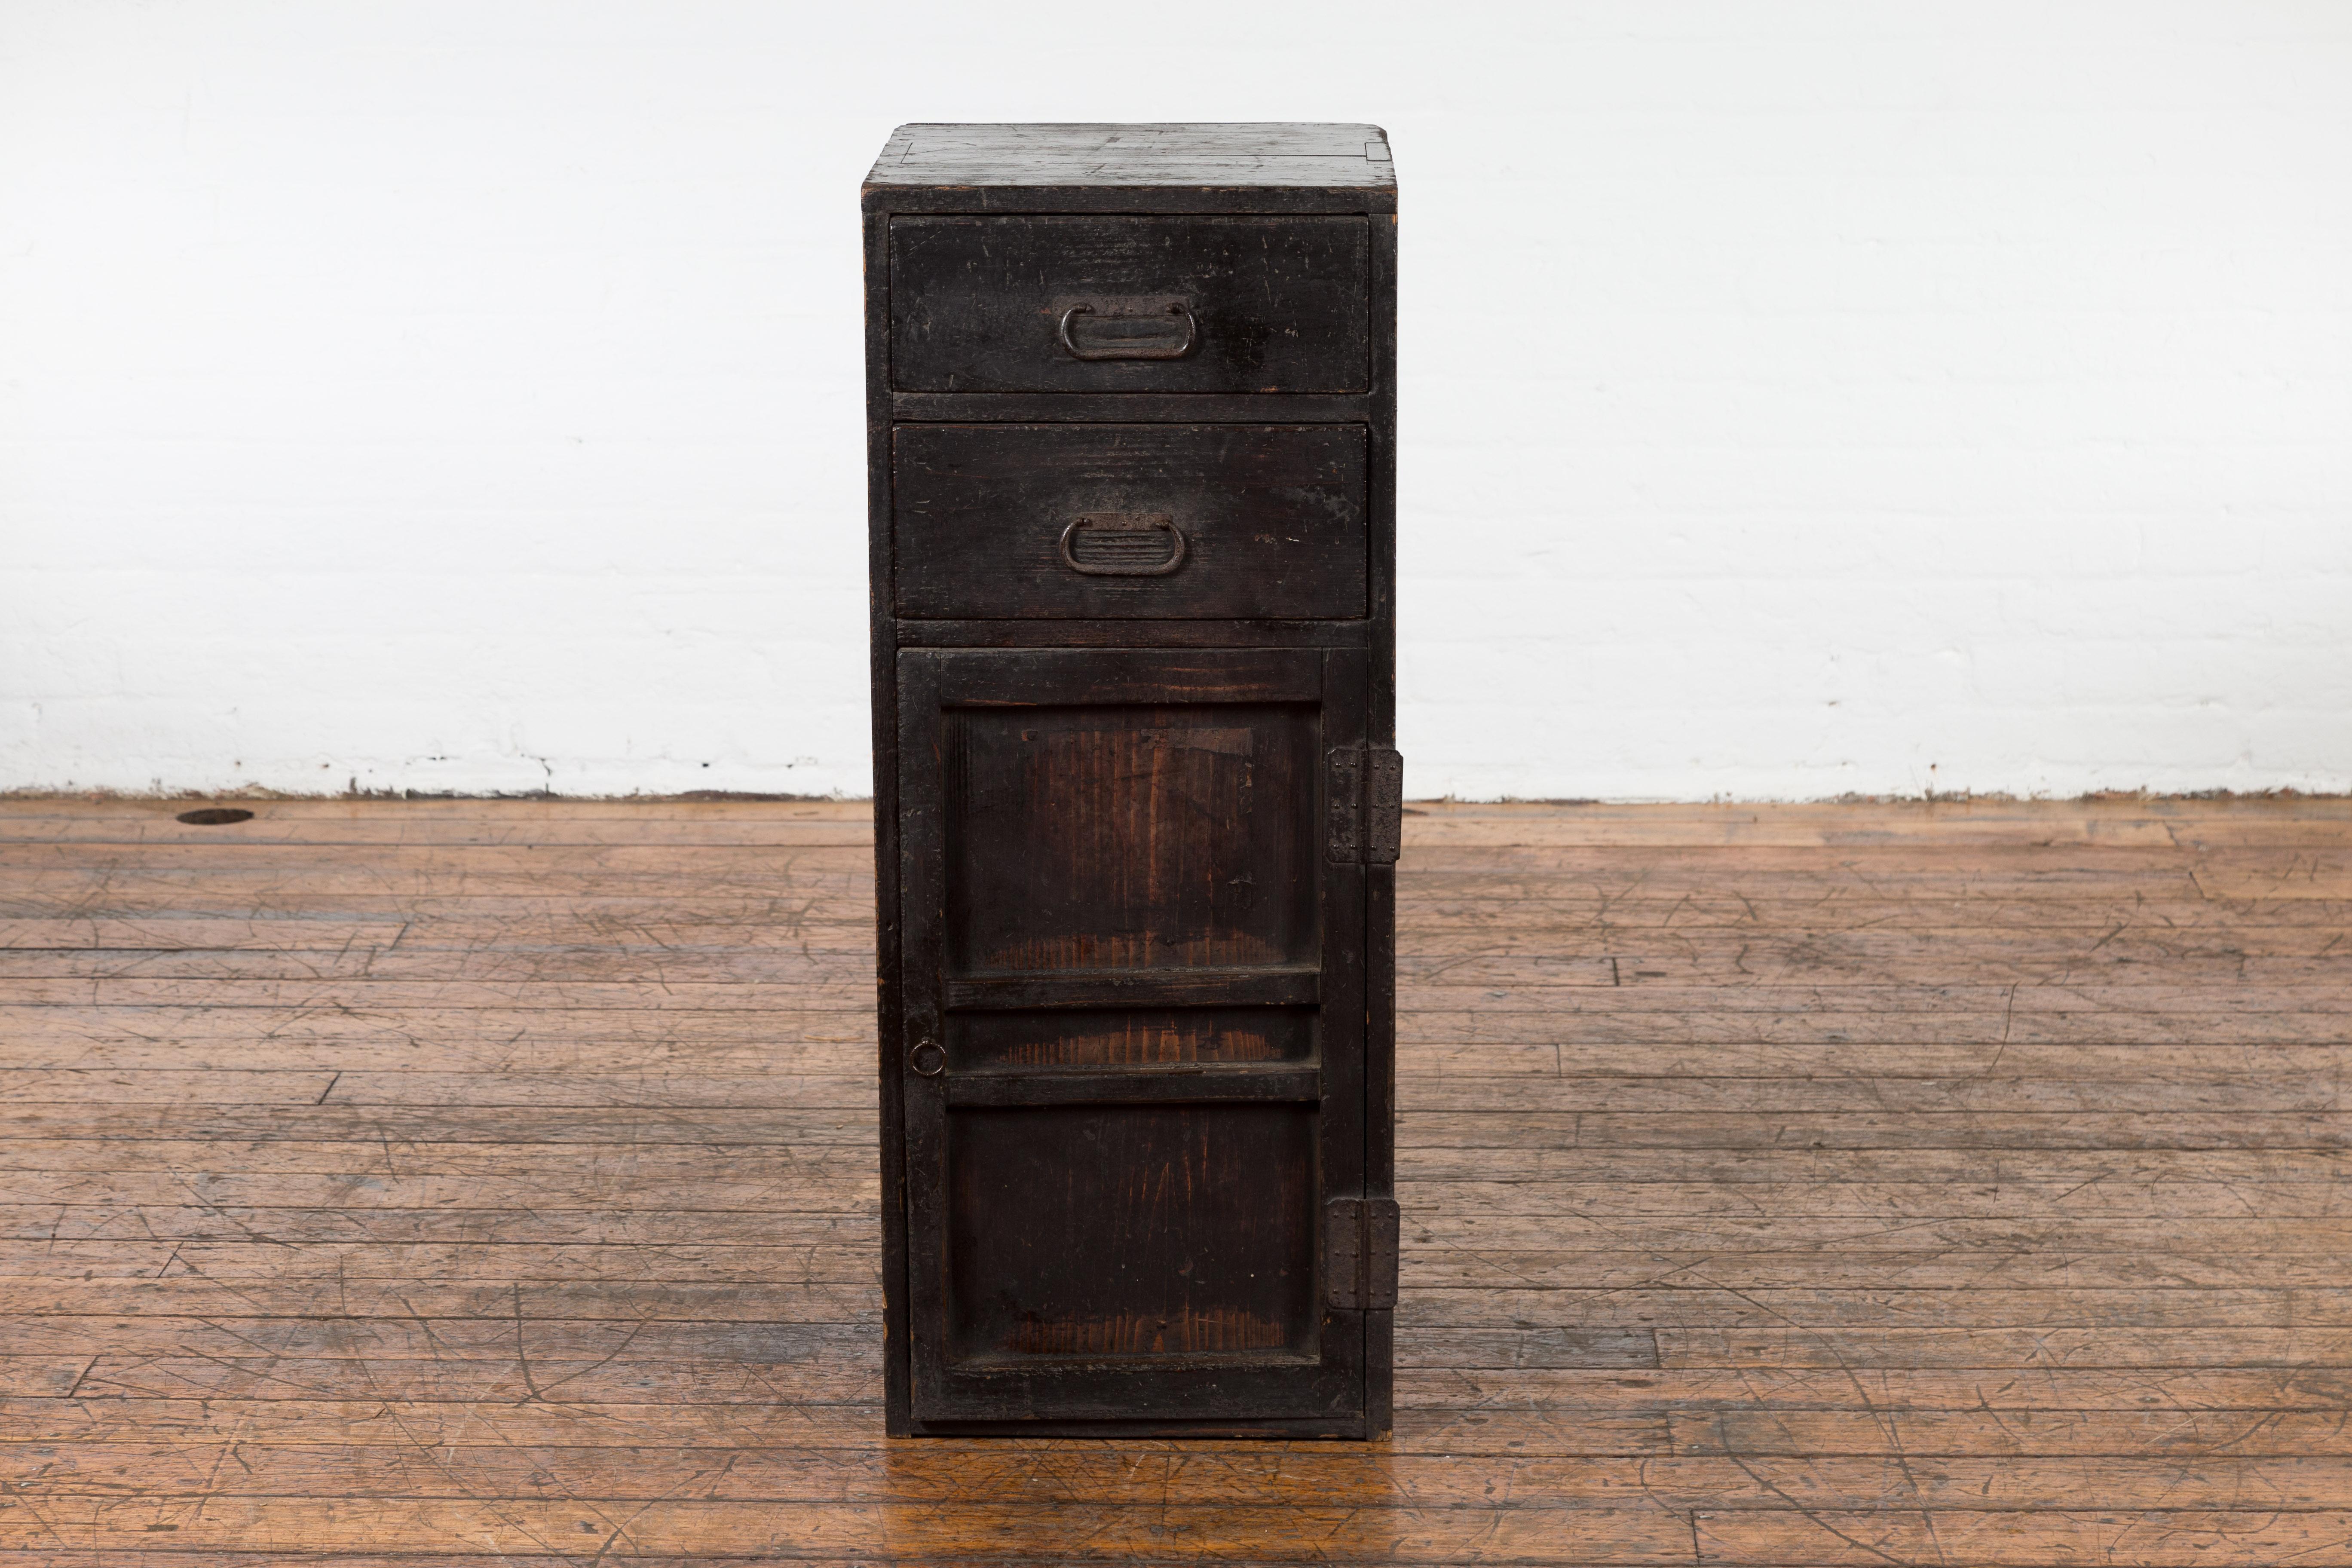 An antique Japanese Taisho period dark brown lacquered side cabinet from the early 20th century with two drawers, single door, inner shelves, metal hardware and weathered appearance. Capturing the essence of the early 20th-century Japanese Taisho